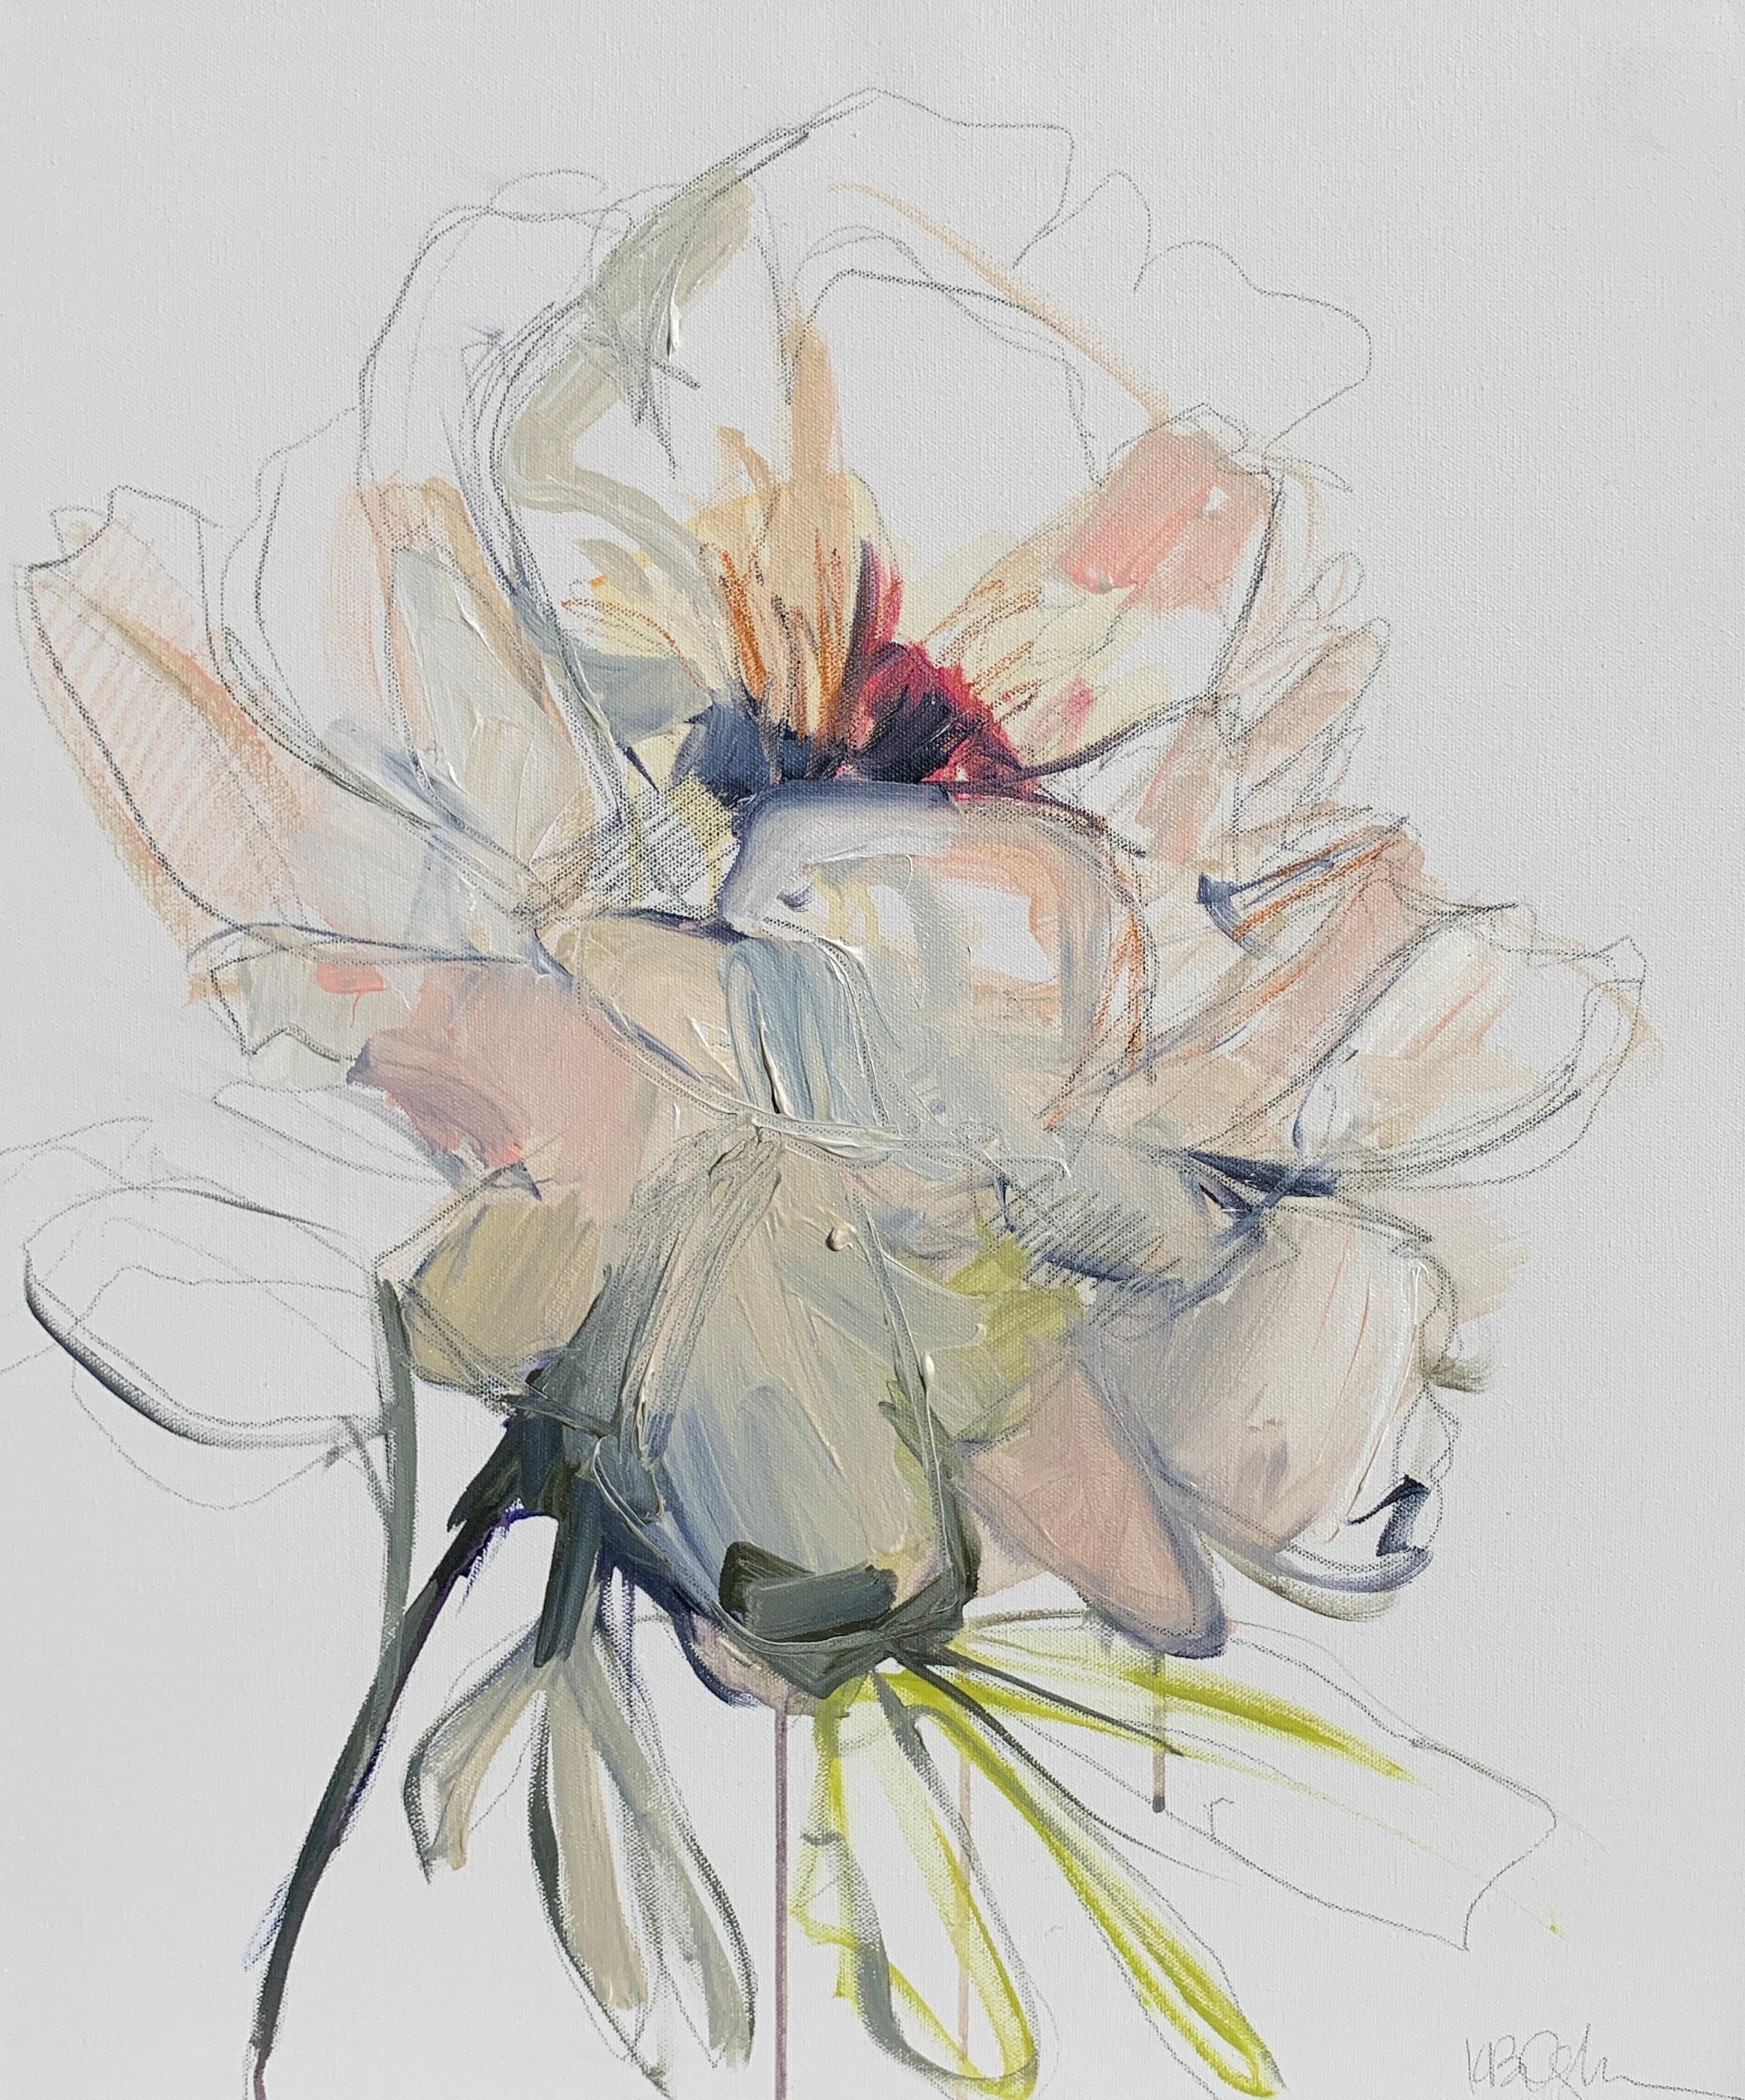 'The Stem' is a medium size floral mixed media on canvas still-life painting created by American artist Kelley Ogburn in 2019. Featuring a soft palette made of soft pink, green, orange and grey tones, this painting is a sideways and effortless